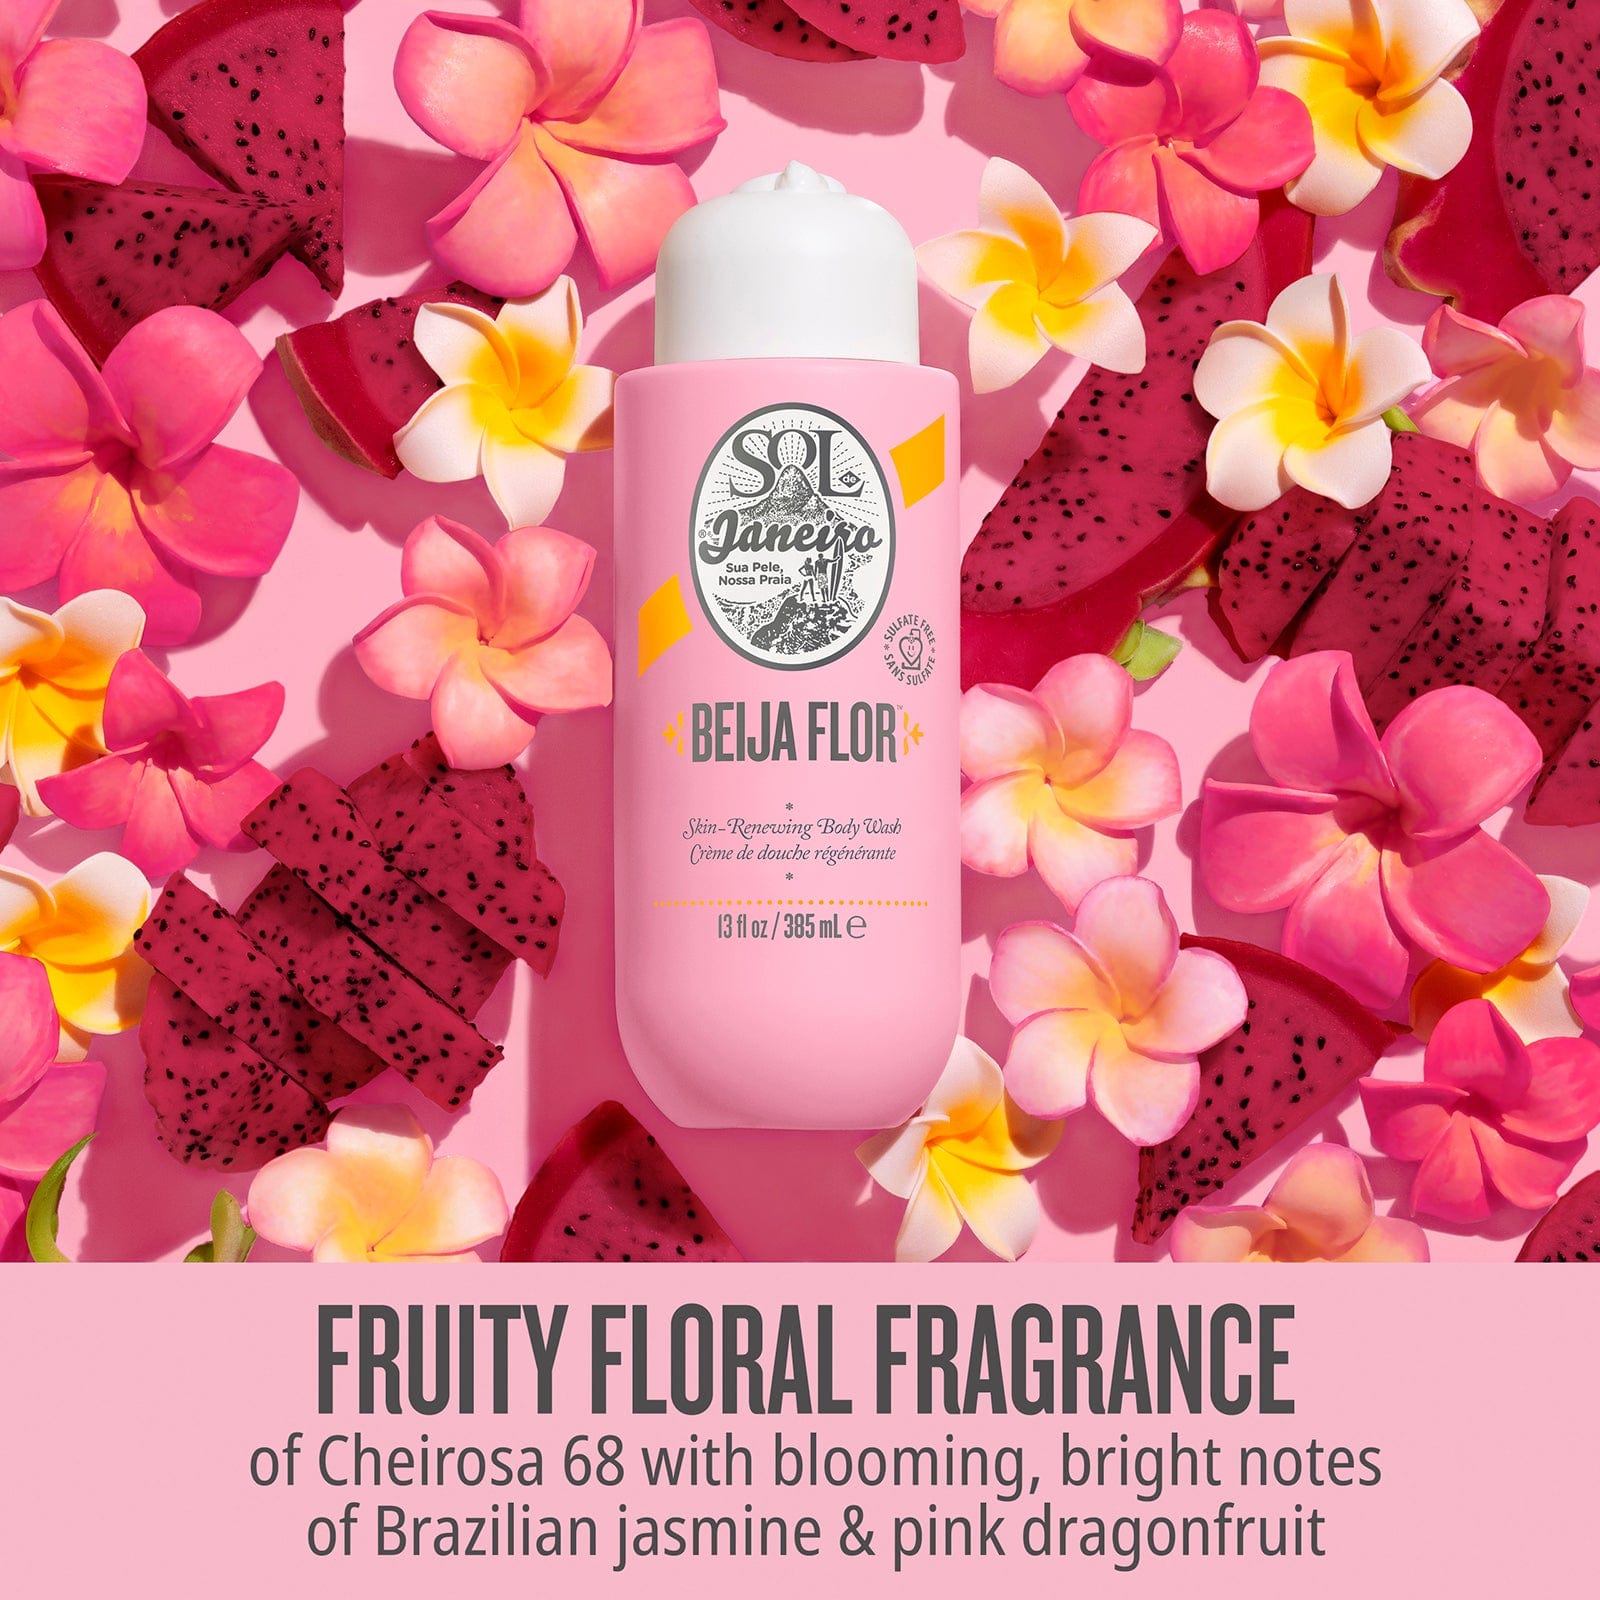 fruity floral fragrance of Cheirosa 68 with blooming, bright notes of Brazilian jasmine and pink dragonfruit